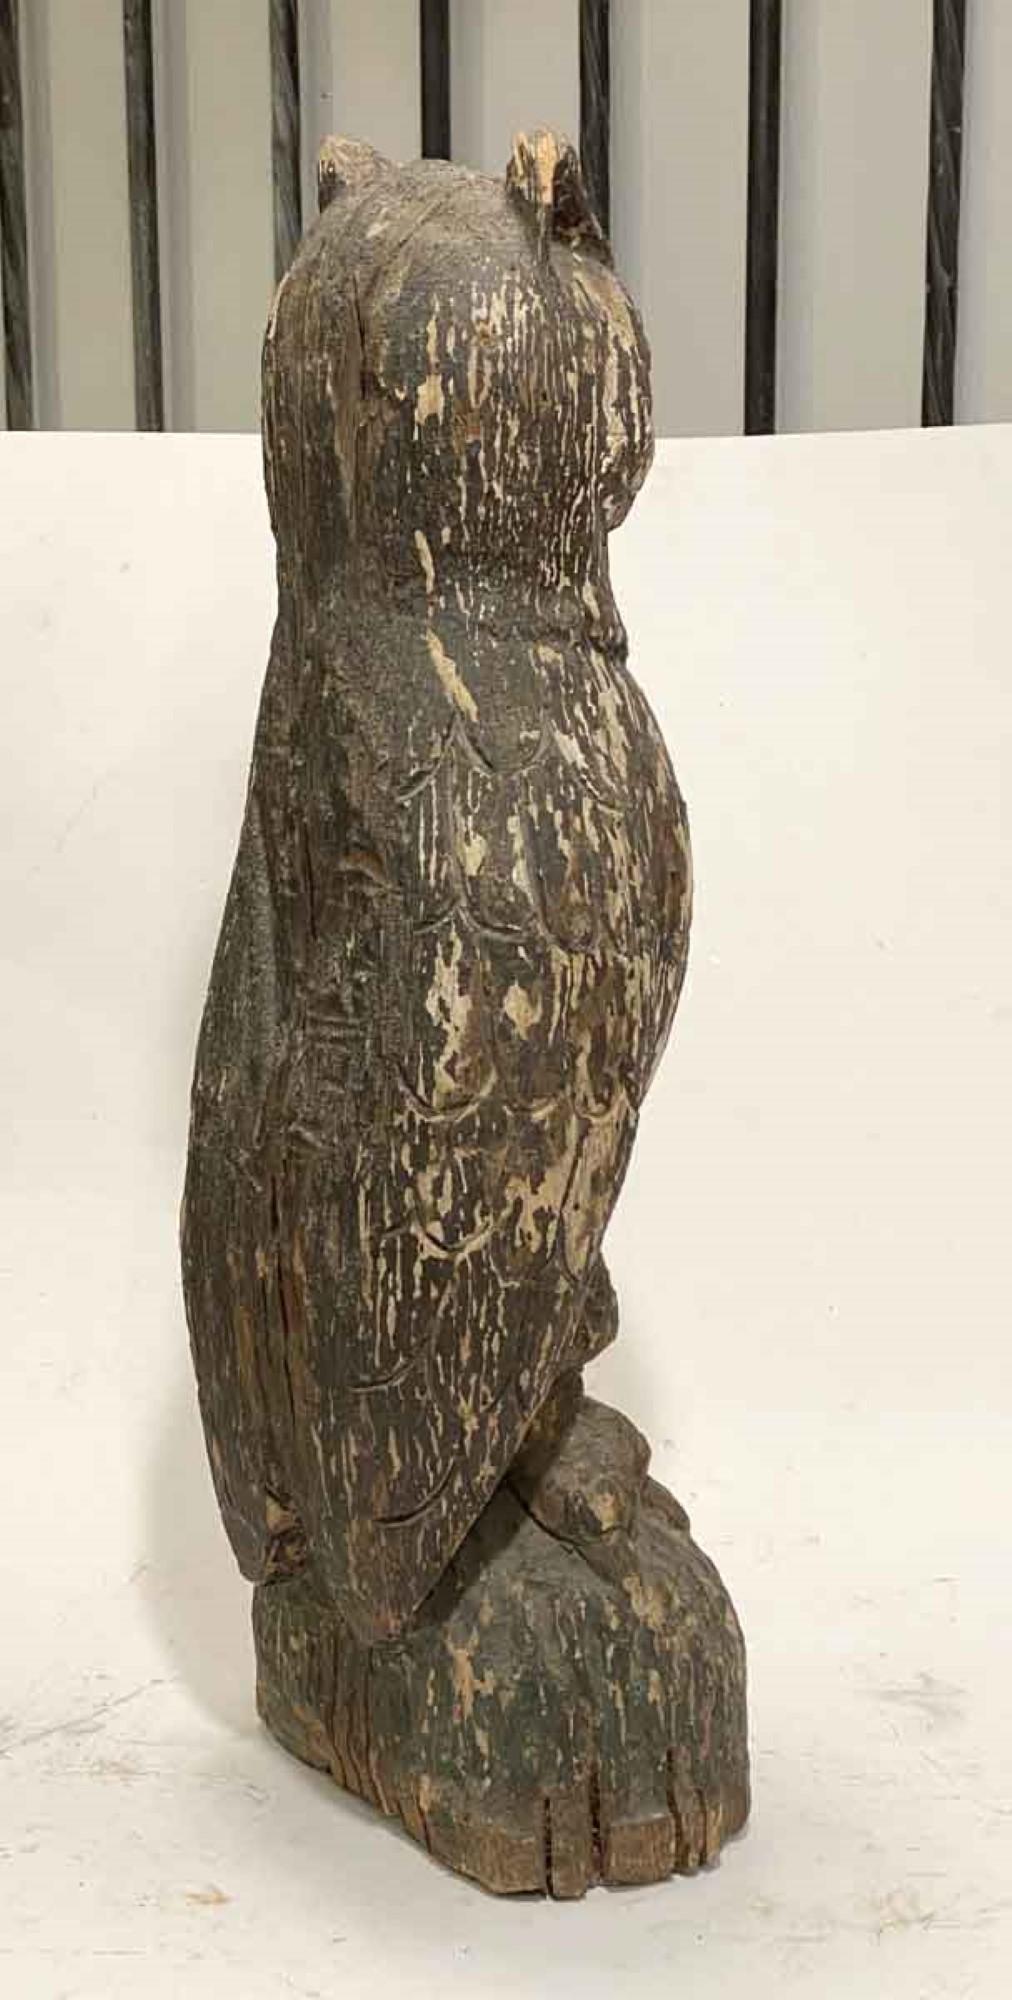 1940s Primitive Hand Carved Wood Owl Statue with Original Weathered Patina 3